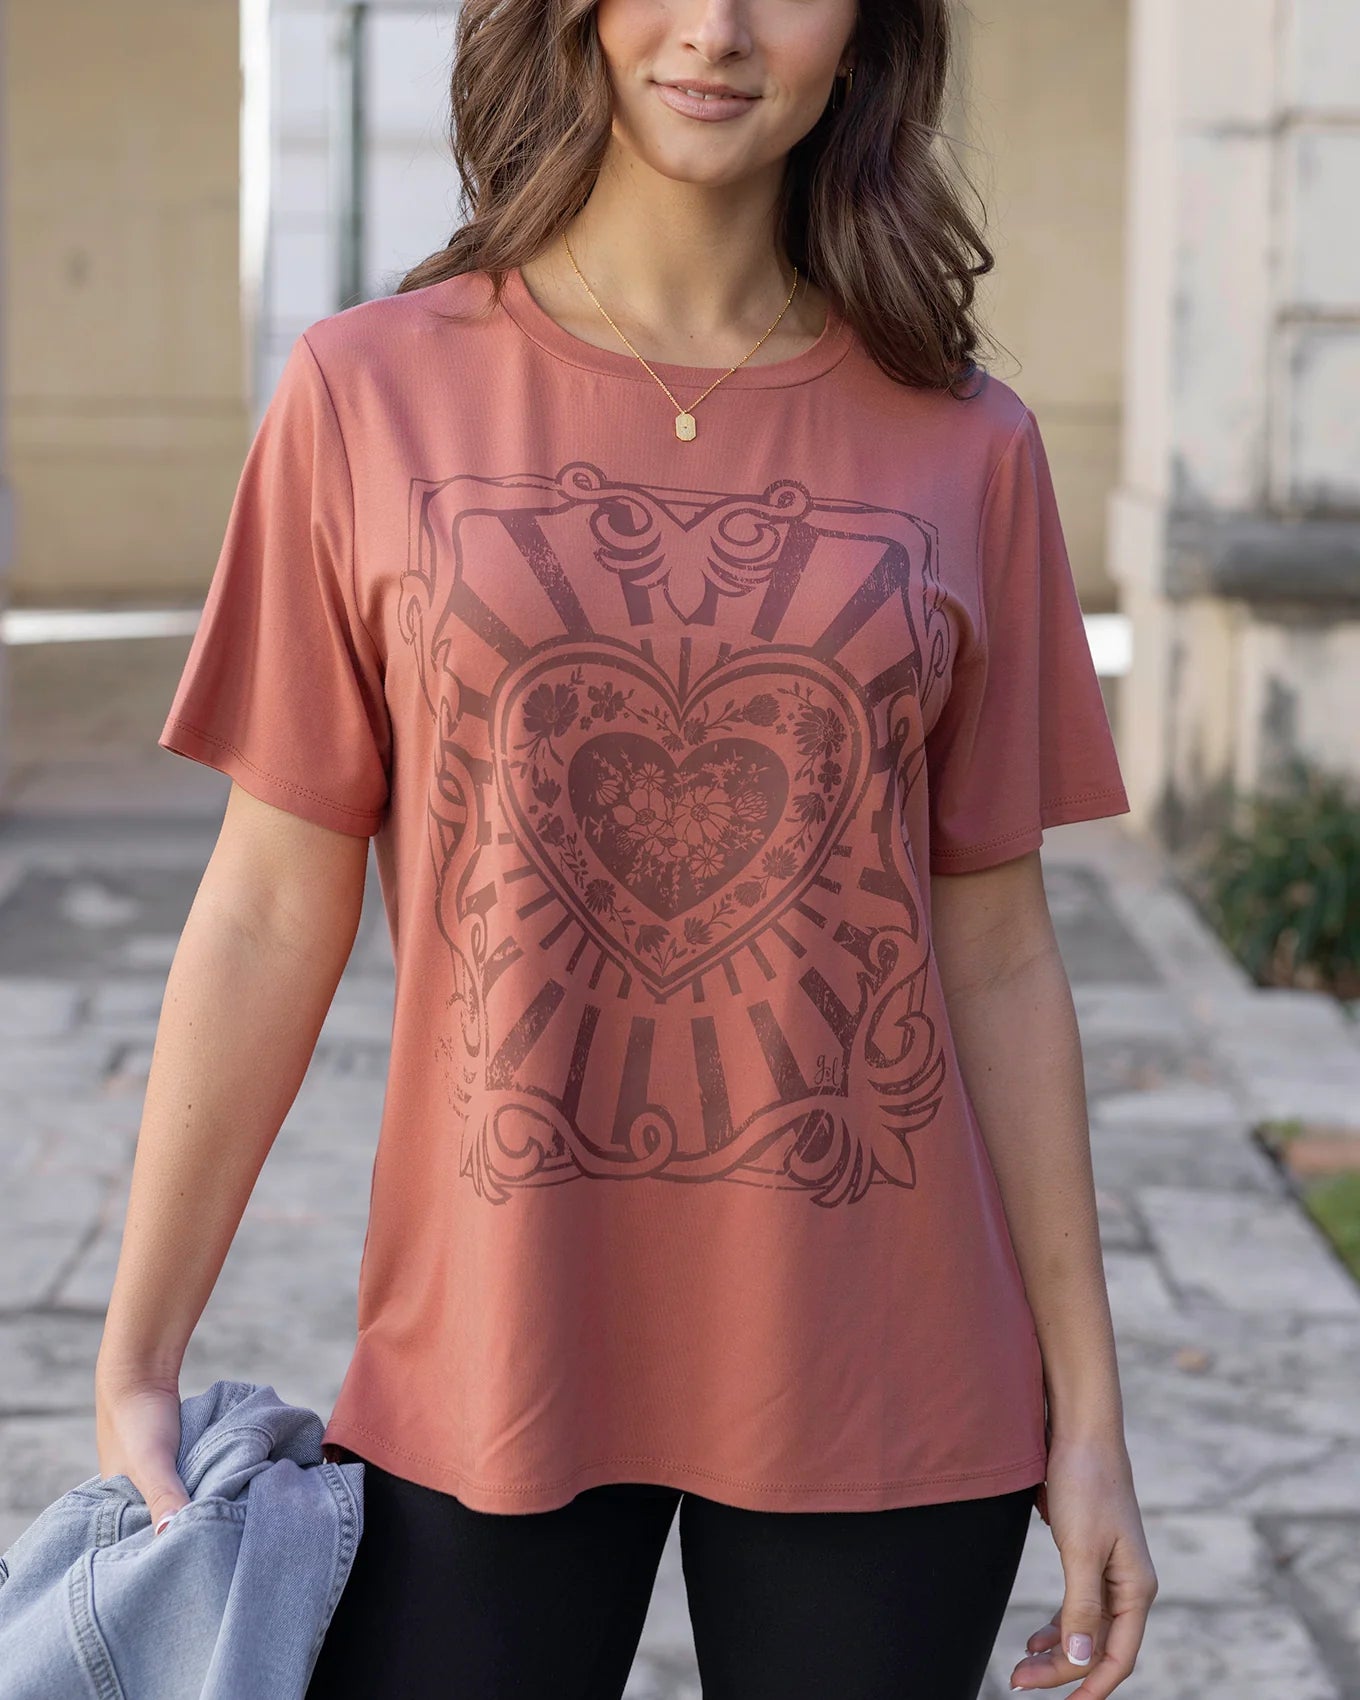 Grace & Lace | Girlfriend Fit Graphic Tee | Retro Heart